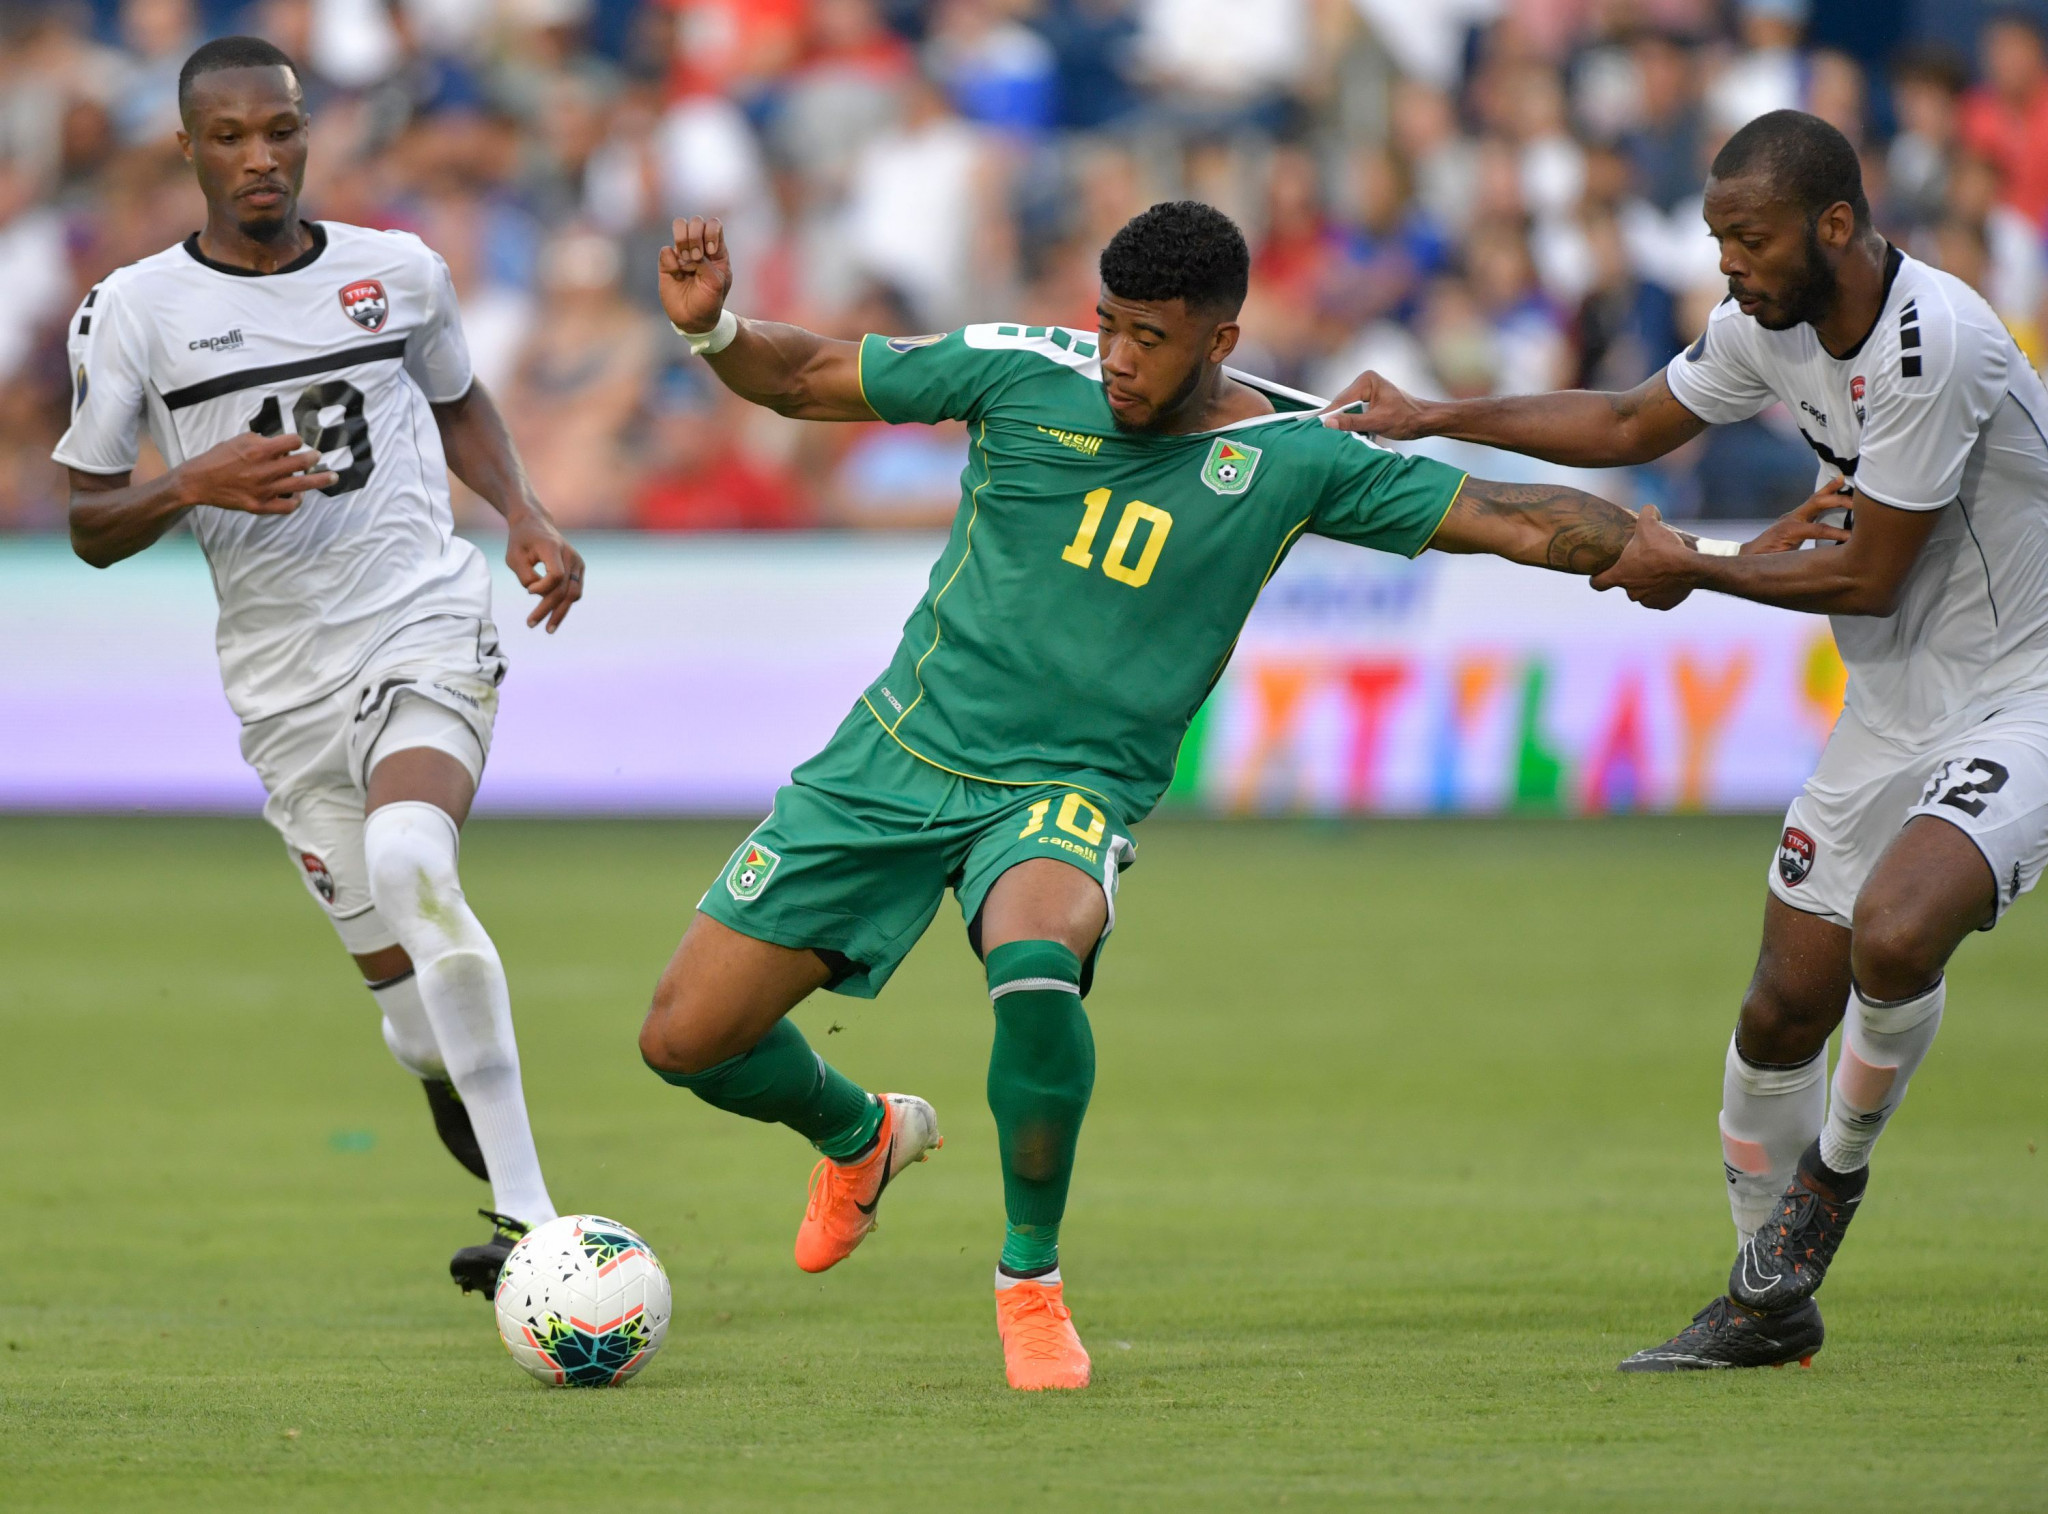 Guyana is a member of the Confederation of North, Central America and Caribbean Association Football, but other sports are linked to South America  ©Getty Images